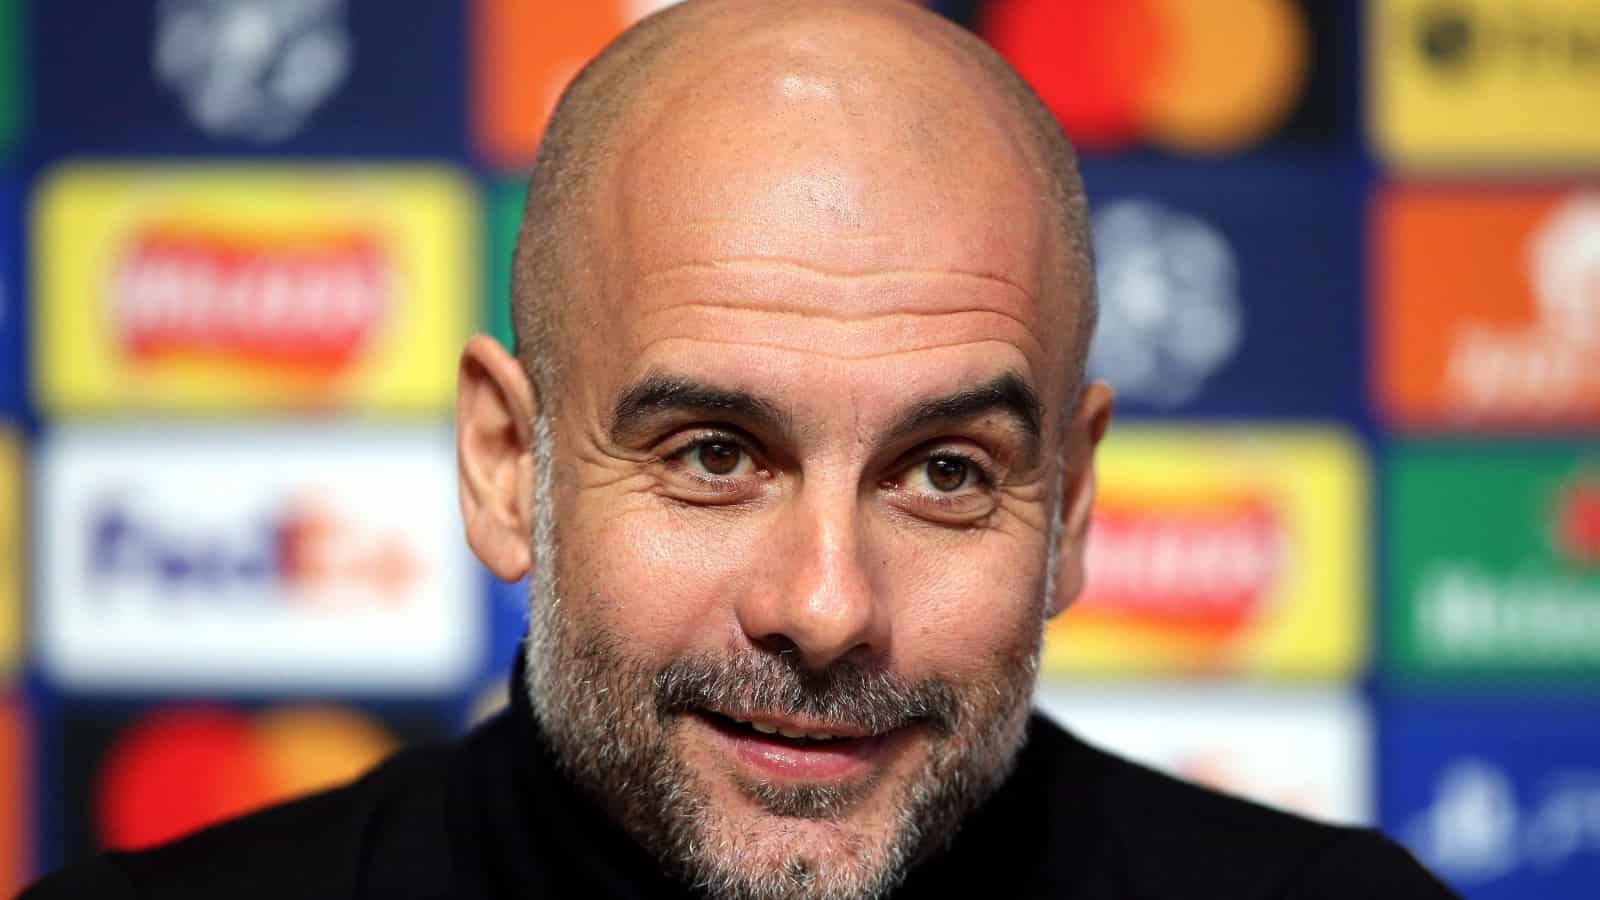 Brazil picks interest in Pep Guardiola as next manager after Tite’s Exit